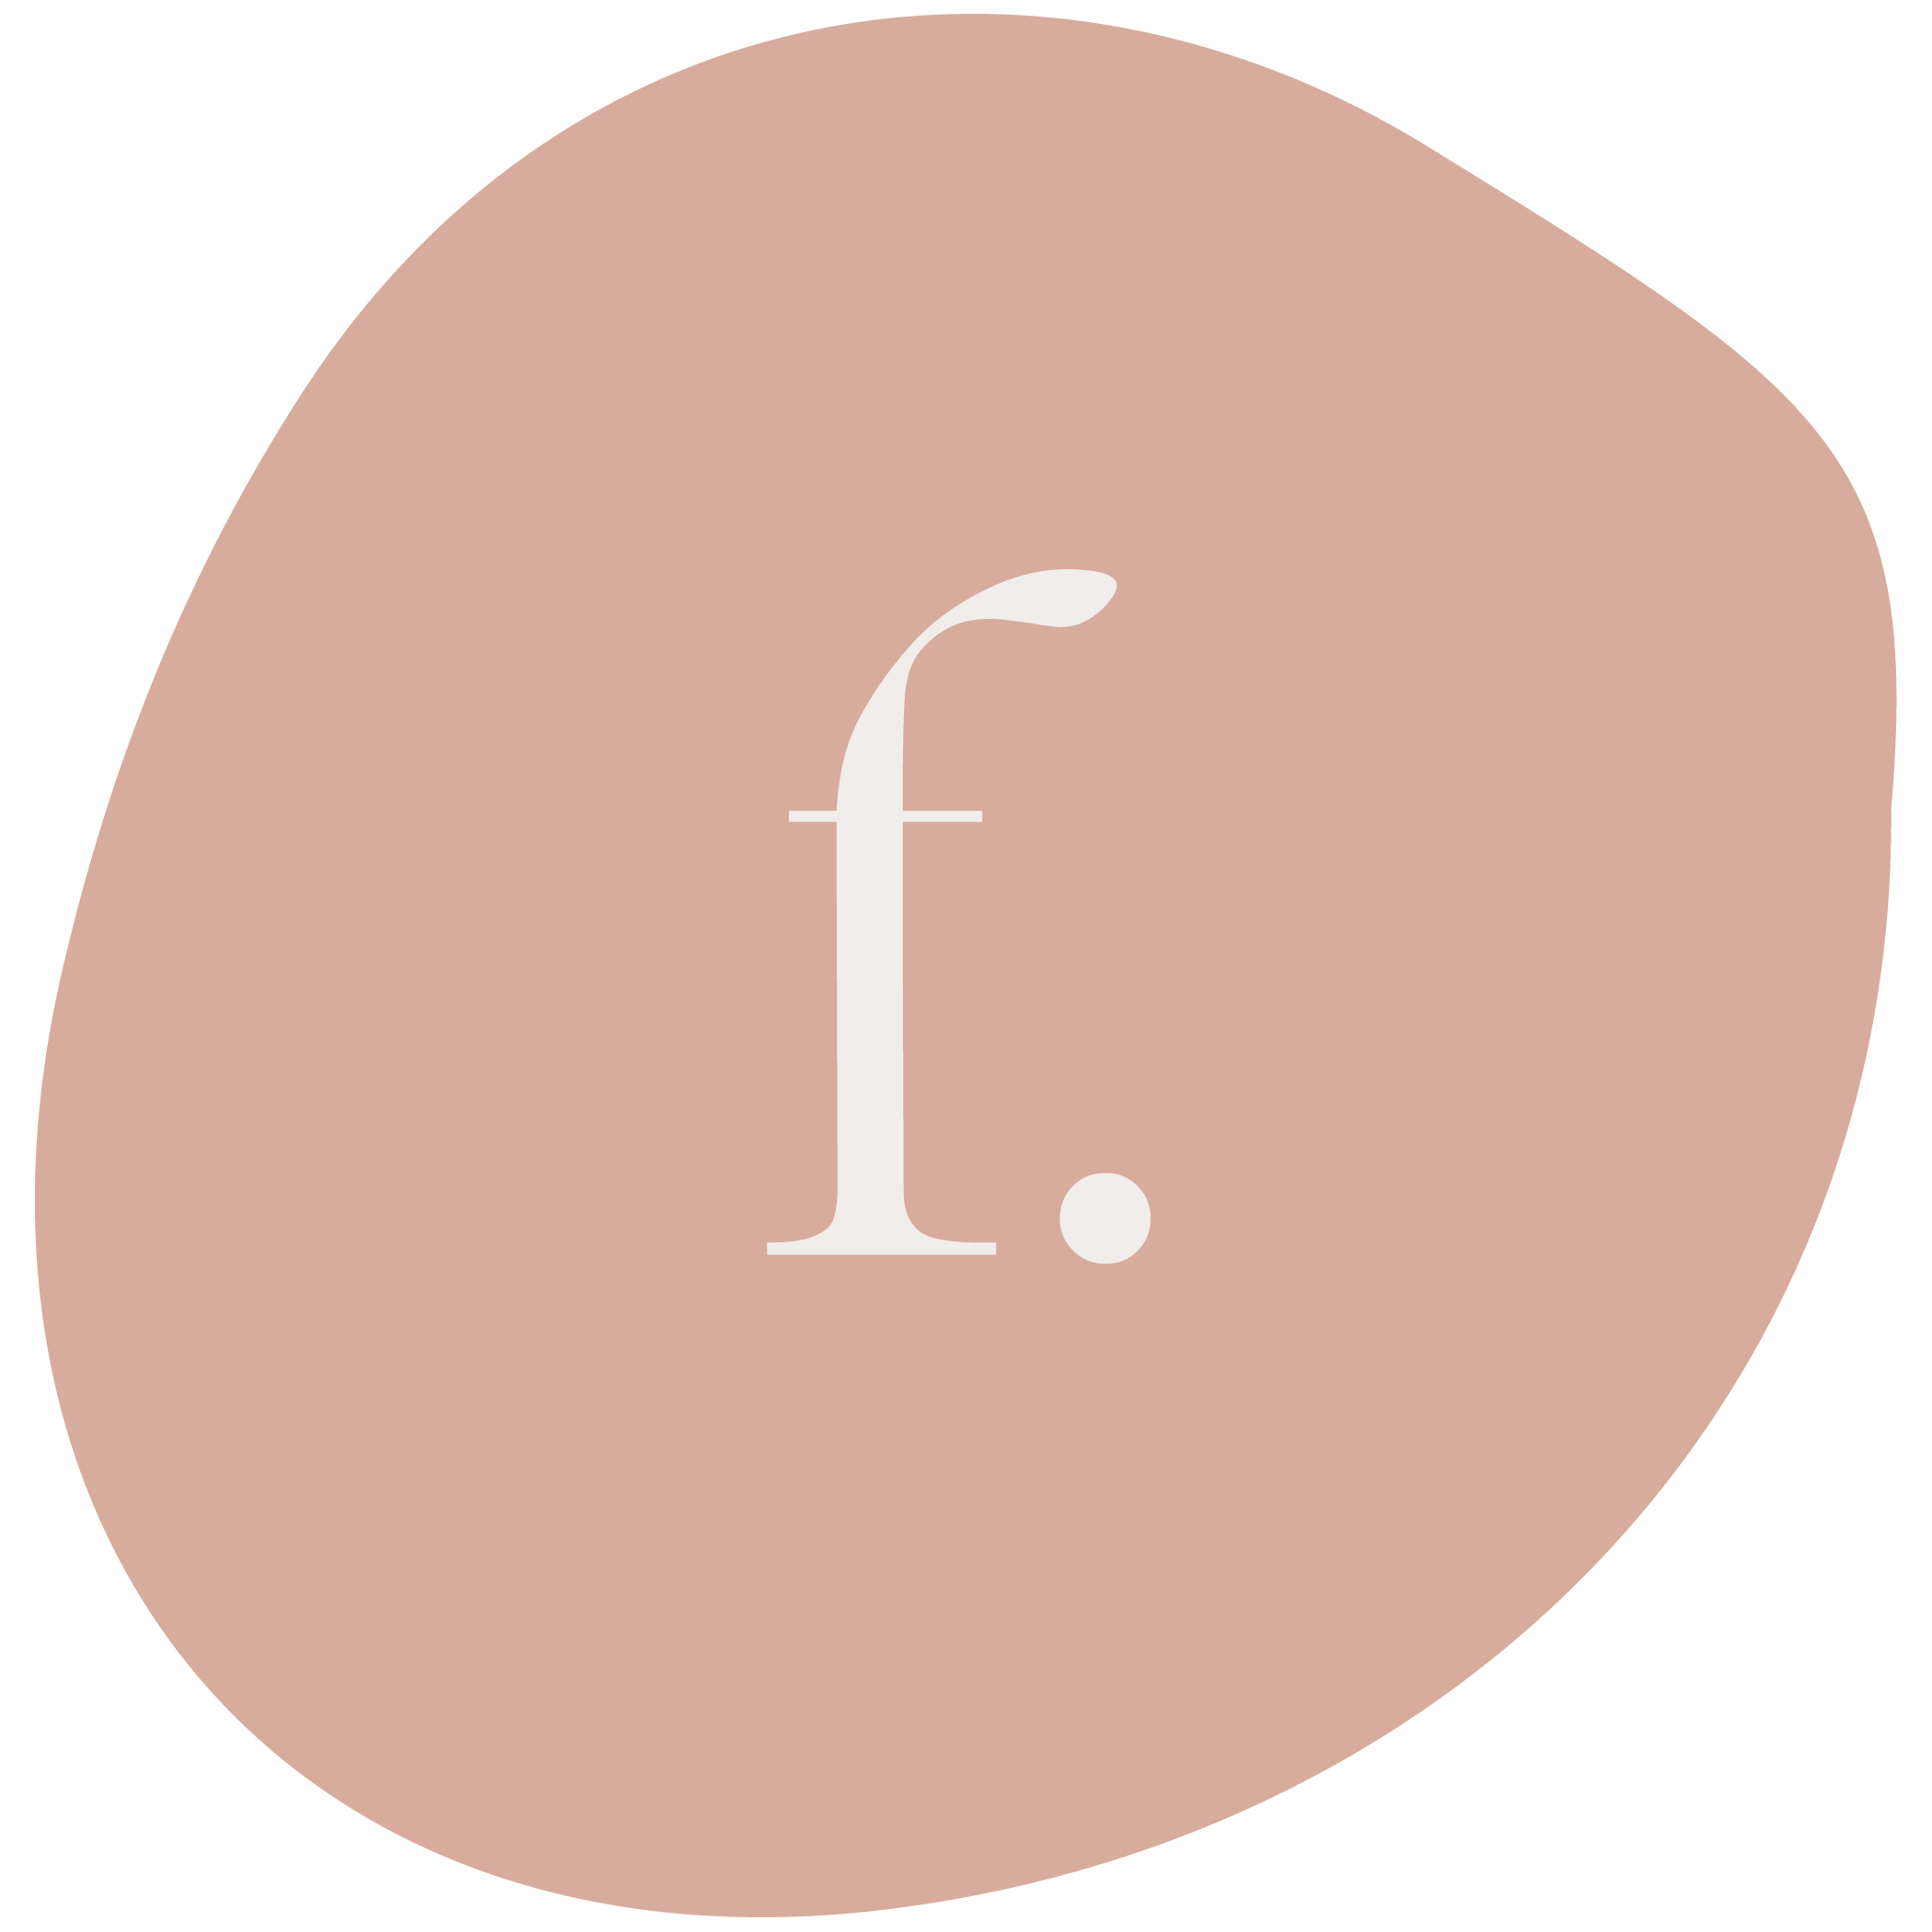 Organic solid circular shape brand mark from the Frankie Brand Kit